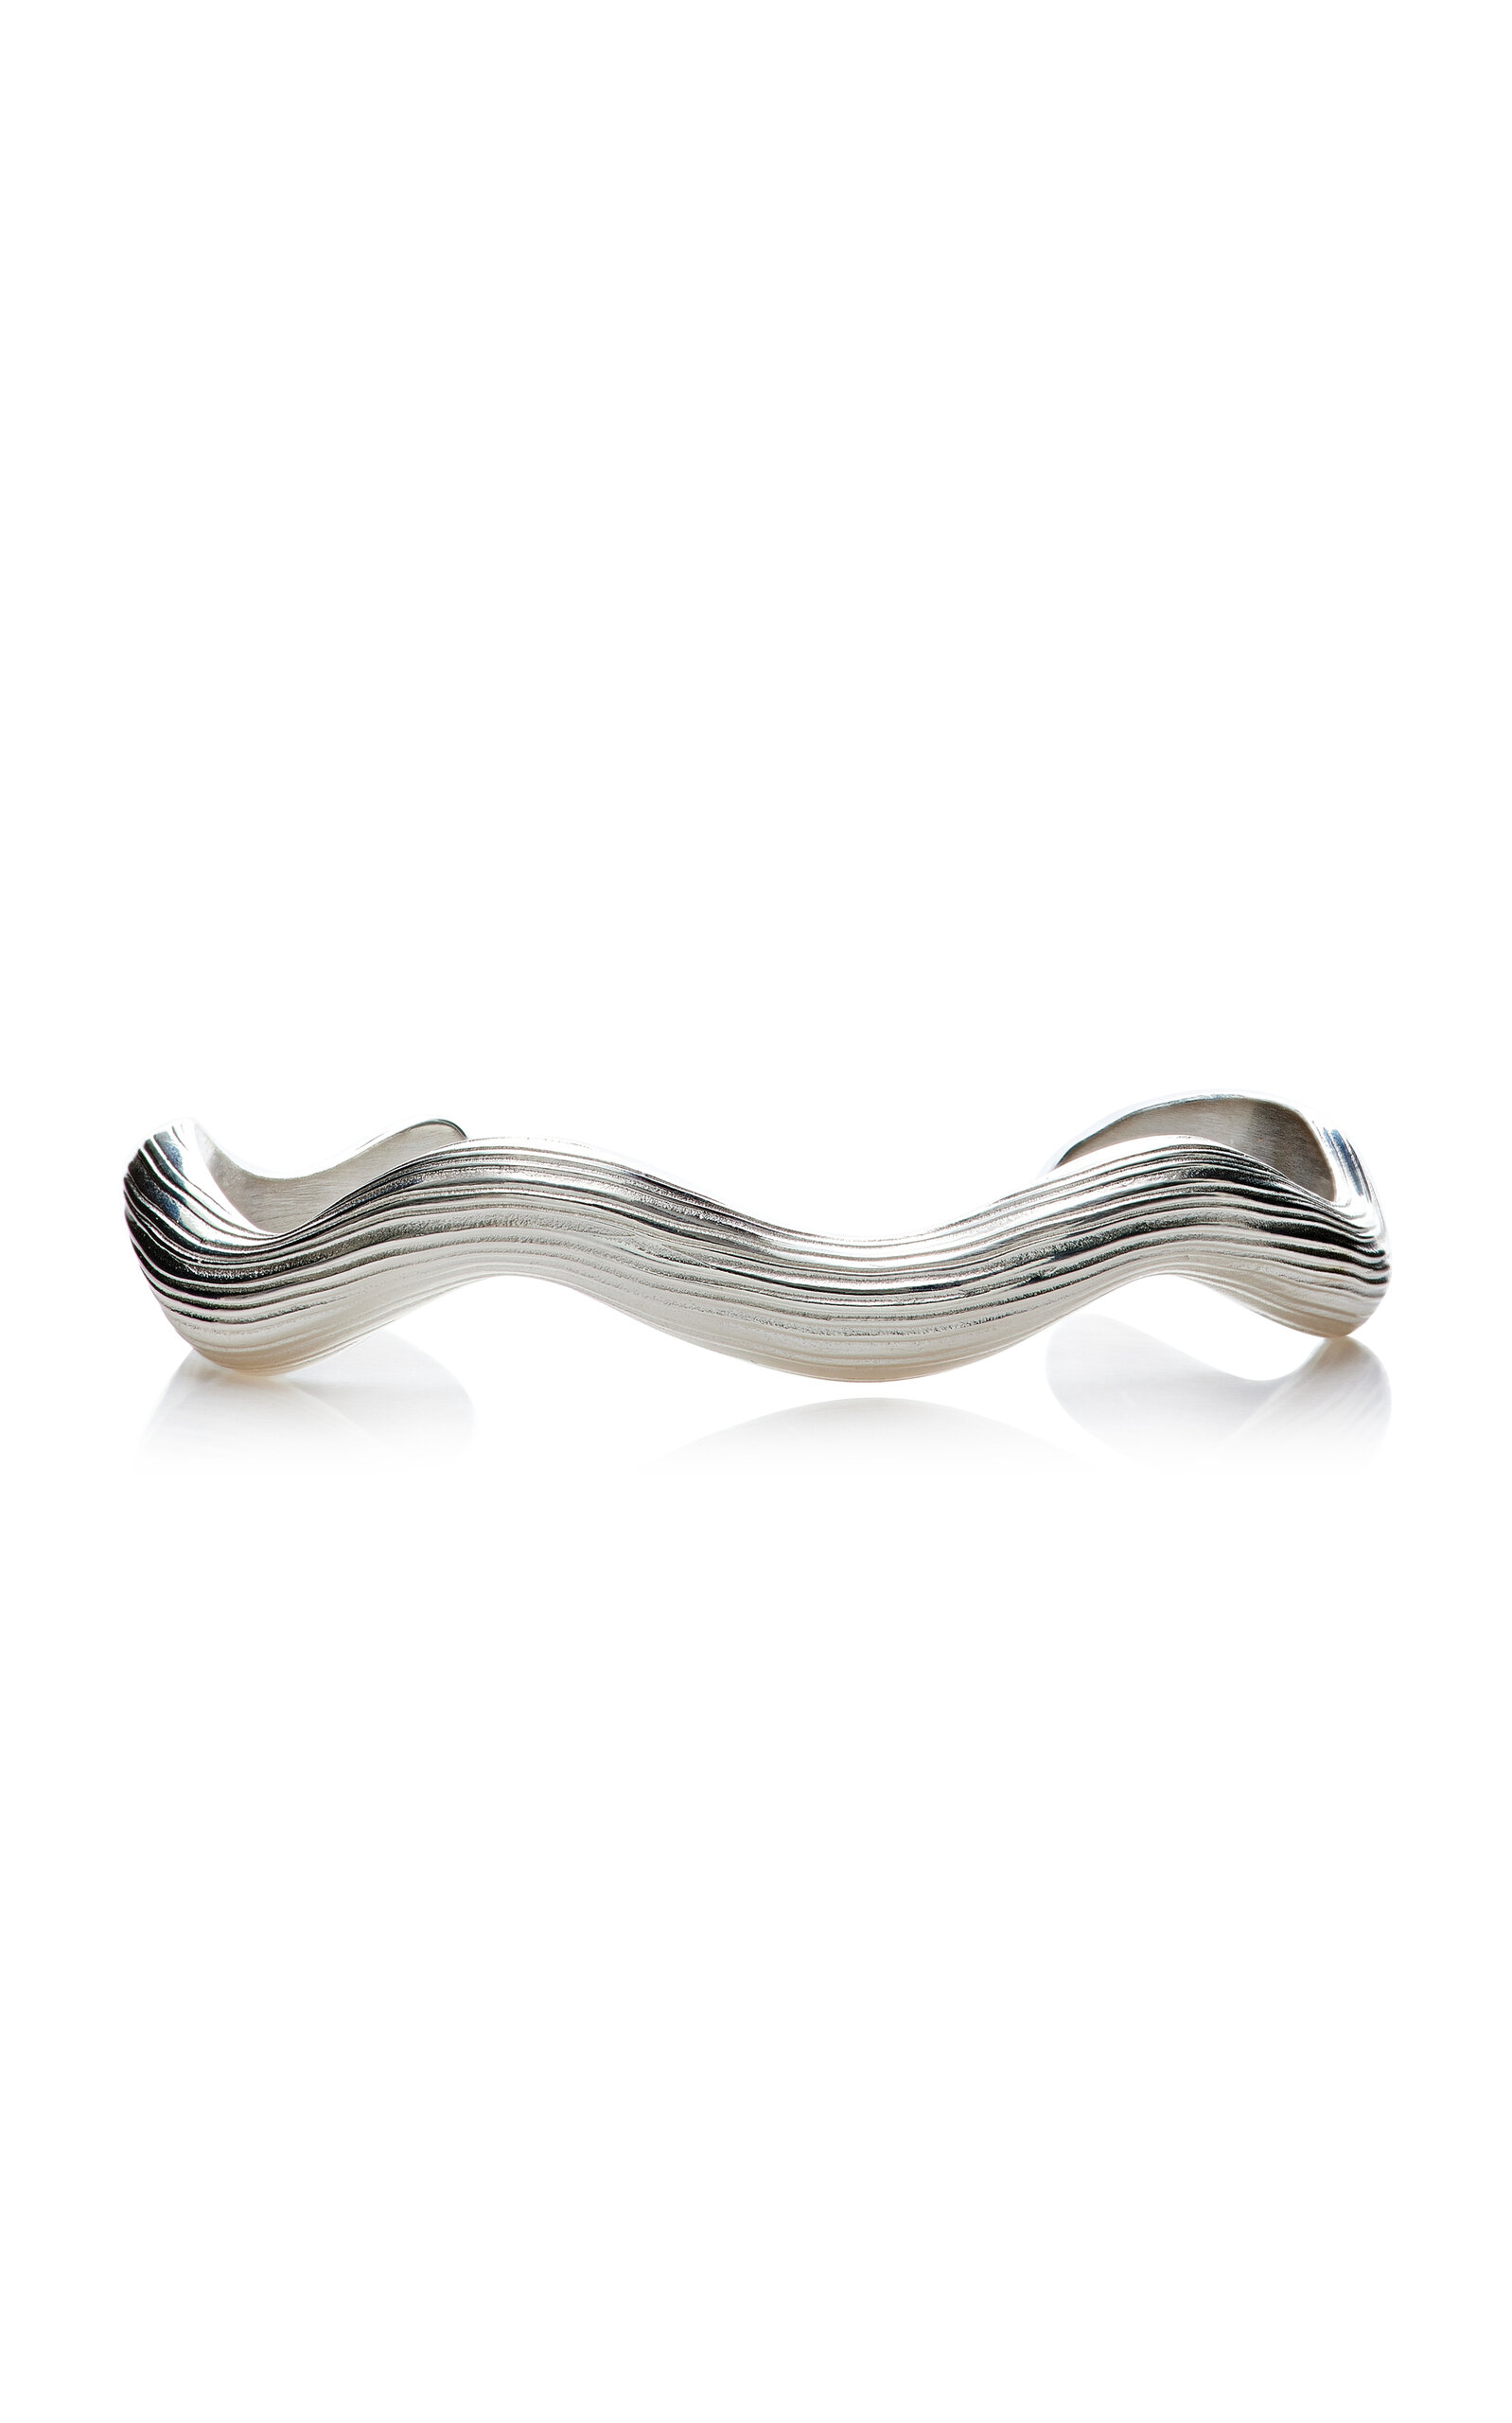 Navajo Recycled Sterling Silver Cuff